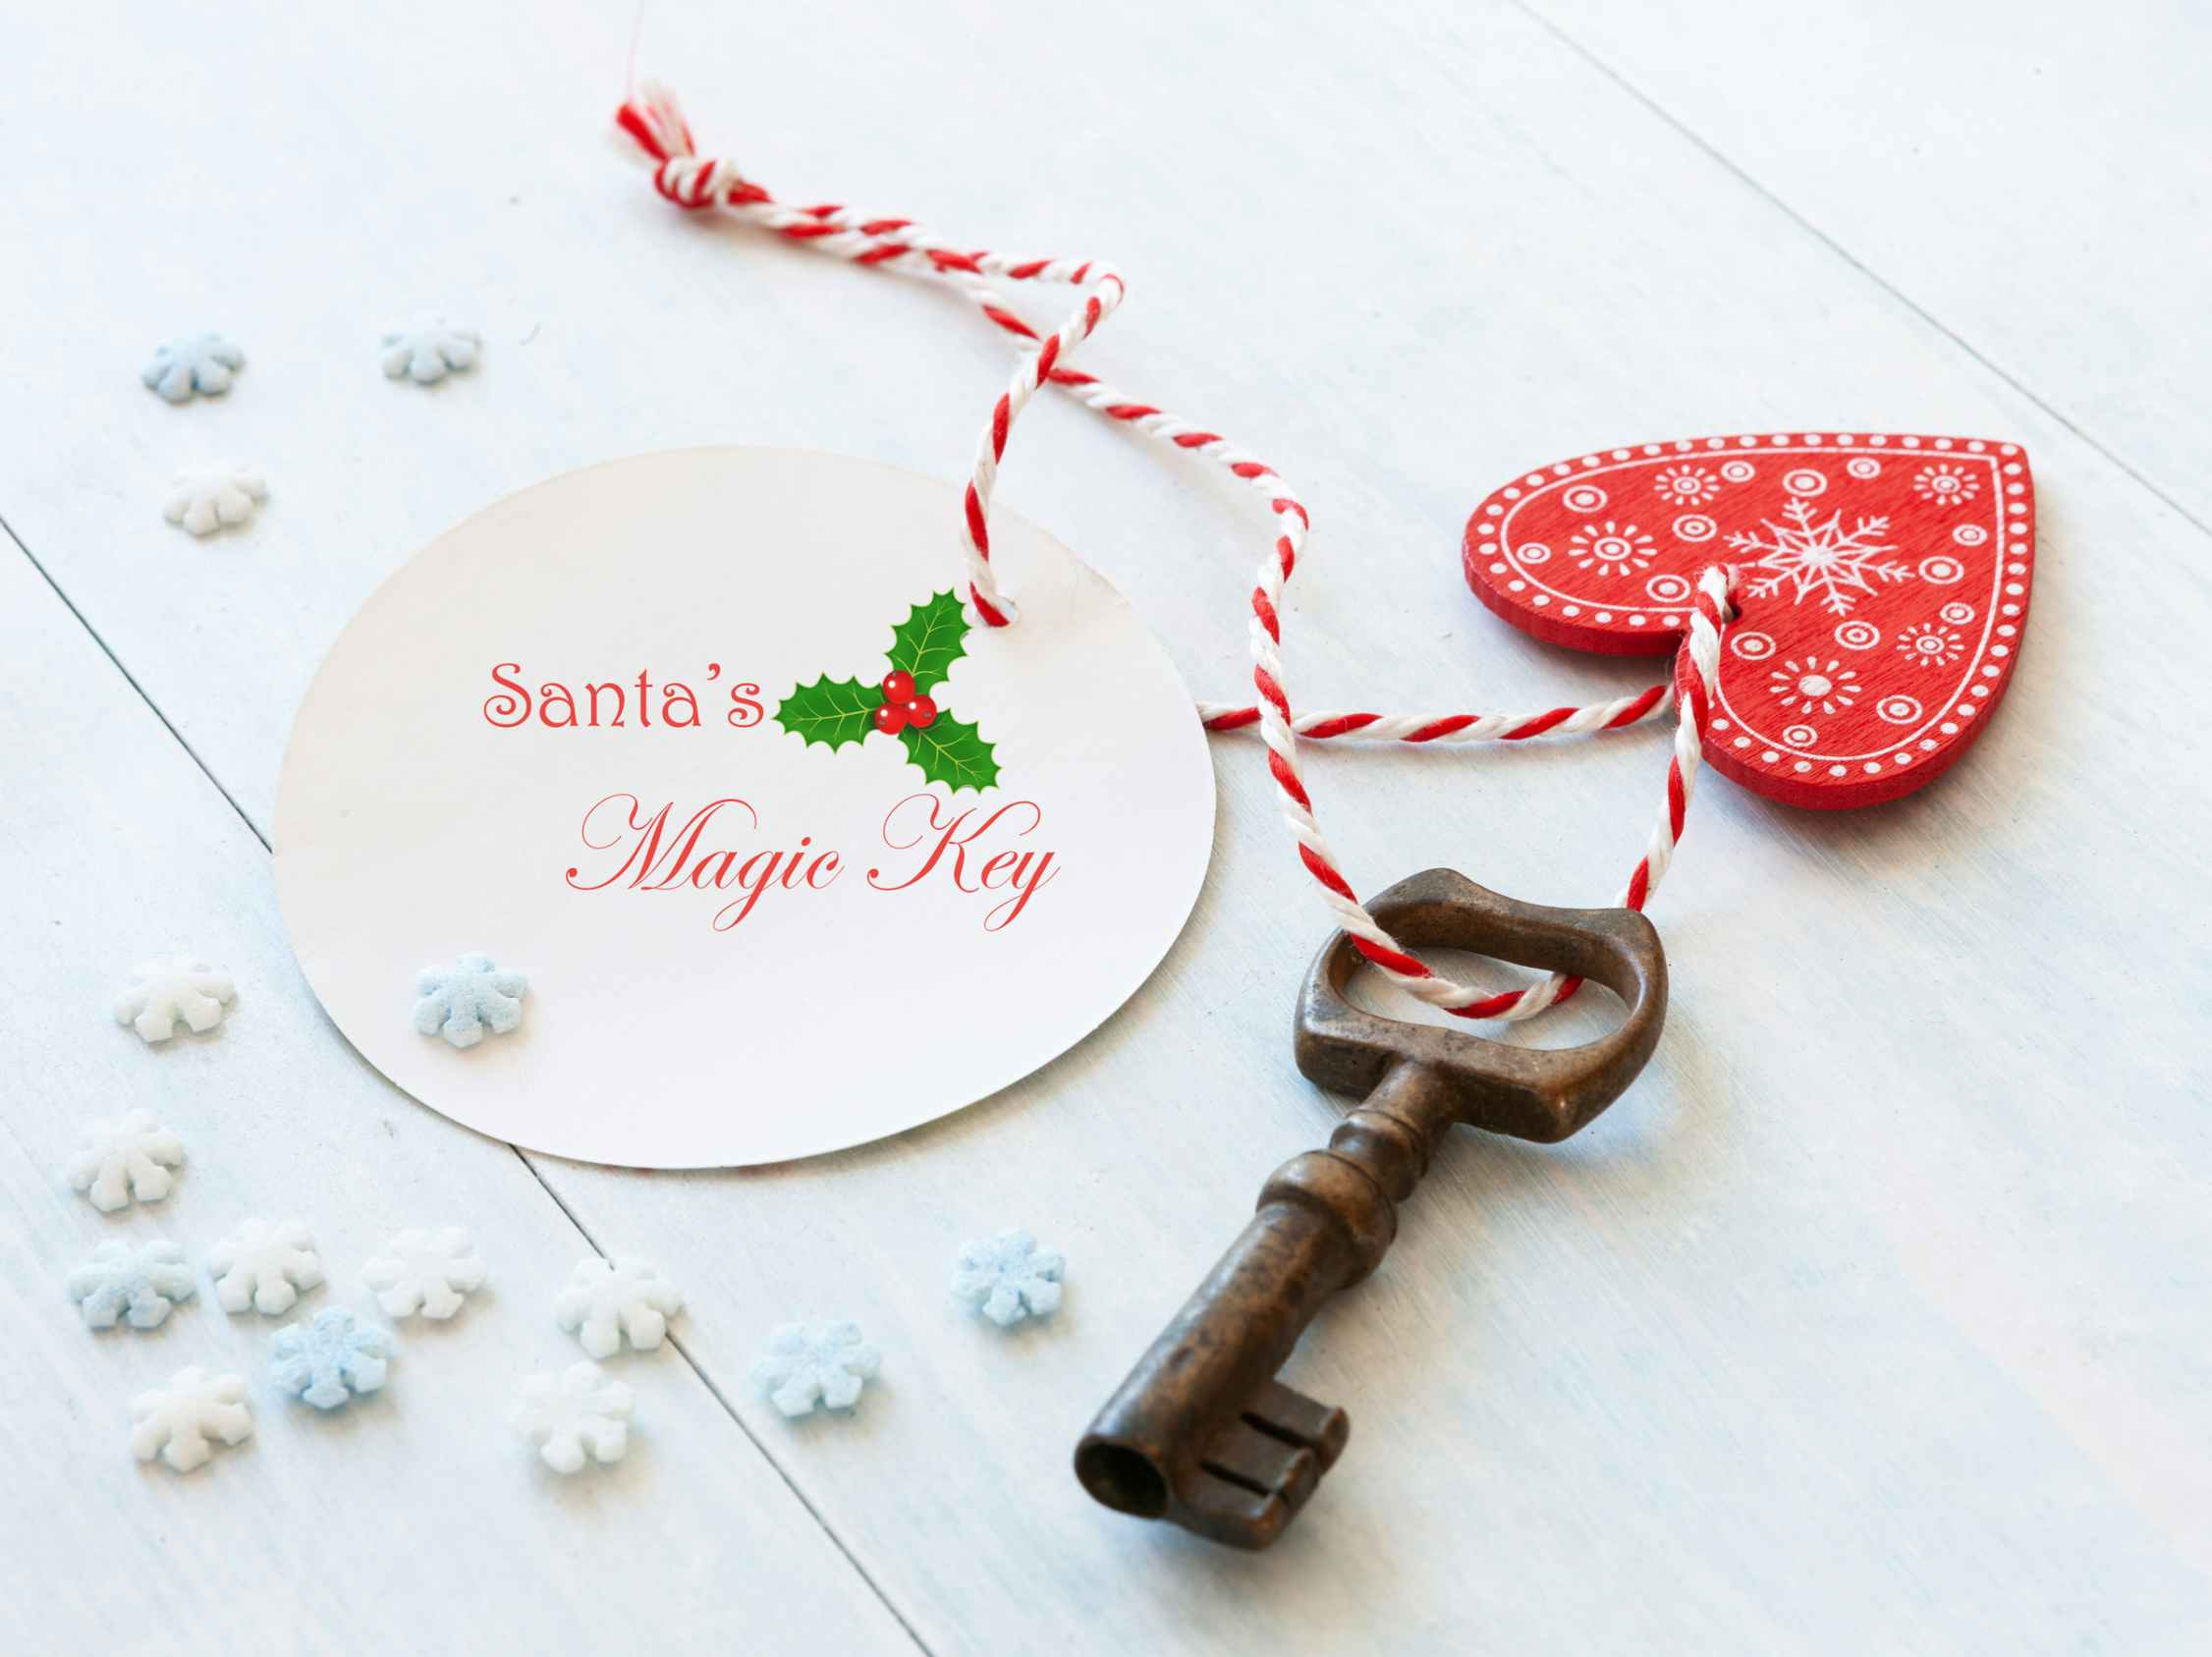 An old-fashioned key with a tag that says "Santa's Magic Key"